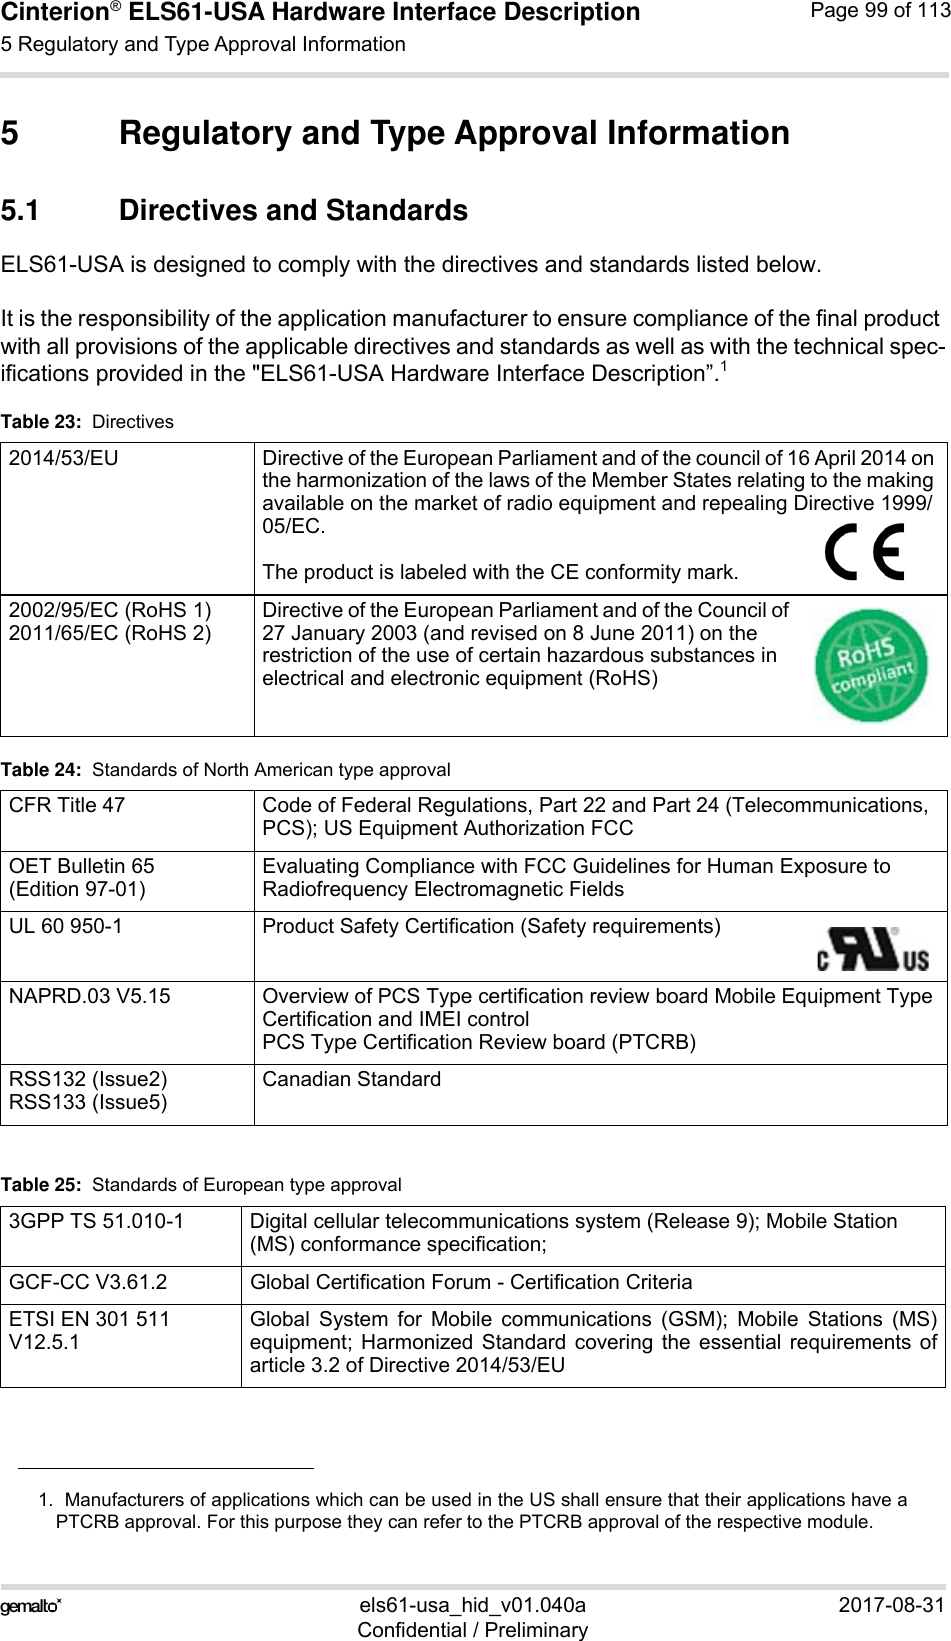 Cinterion® ELS61-USA Hardware Interface Description5 Regulatory and Type Approval Information105els61-usa_hid_v01.040a 2017-08-31Confidential / PreliminaryPage 99 of 1135 Regulatory and Type Approval Information5.1 Directives and StandardsELS61-USA is designed to comply with the directives and standards listed below.It is the responsibility of the application manufacturer to ensure compliance of the final product with all provisions of the applicable directives and standards as well as with the technical spec-ifications provided in the &quot;ELS61-USA Hardware Interface Description”.11.  Manufacturers of applications which can be used in the US shall ensure that their applications have aPTCRB approval. For this purpose they can refer to the PTCRB approval of the respective module. Table 23:  Directives2014/53/EU Directive of the European Parliament and of the council of 16 April 2014 on the harmonization of the laws of the Member States relating to the making available on the market of radio equipment and repealing Directive 1999/ 05/EC.The product is labeled with the CE conformity mark.2002/95/EC (RoHS 1)2011/65/EC (RoHS 2)Directive of the European Parliament and of the Council of 27 January 2003 (and revised on 8 June 2011) on the restriction of the use of certain hazardous substances in electrical and electronic equipment (RoHS)Table 24:  Standards of North American type approvalCFR Title 47 Code of Federal Regulations, Part 22 and Part 24 (Telecommunications, PCS); US Equipment Authorization FCCOET Bulletin 65 (Edition 97-01) Evaluating Compliance with FCC Guidelines for Human Exposure to Radiofrequency Electromagnetic FieldsUL 60 950-1 Product Safety Certification (Safety requirements)NAPRD.03 V5.15 Overview of PCS Type certification review board Mobile Equipment Type Certification and IMEI controlPCS Type Certification Review board (PTCRB)RSS132 (Issue2)RSS133 (Issue5)Canadian StandardTable 25:  Standards of European type approval3GPP TS 51.010-1 Digital cellular telecommunications system (Release 9); Mobile Station (MS) conformance specification;GCF-CC V3.61.2 Global Certification Forum - Certification CriteriaETSI EN 301 511V12.5.1Global System for Mobile communications (GSM); Mobile Stations (MS)equipment; Harmonized Standard covering the essential requirements ofarticle 3.2 of Directive 2014/53/EU